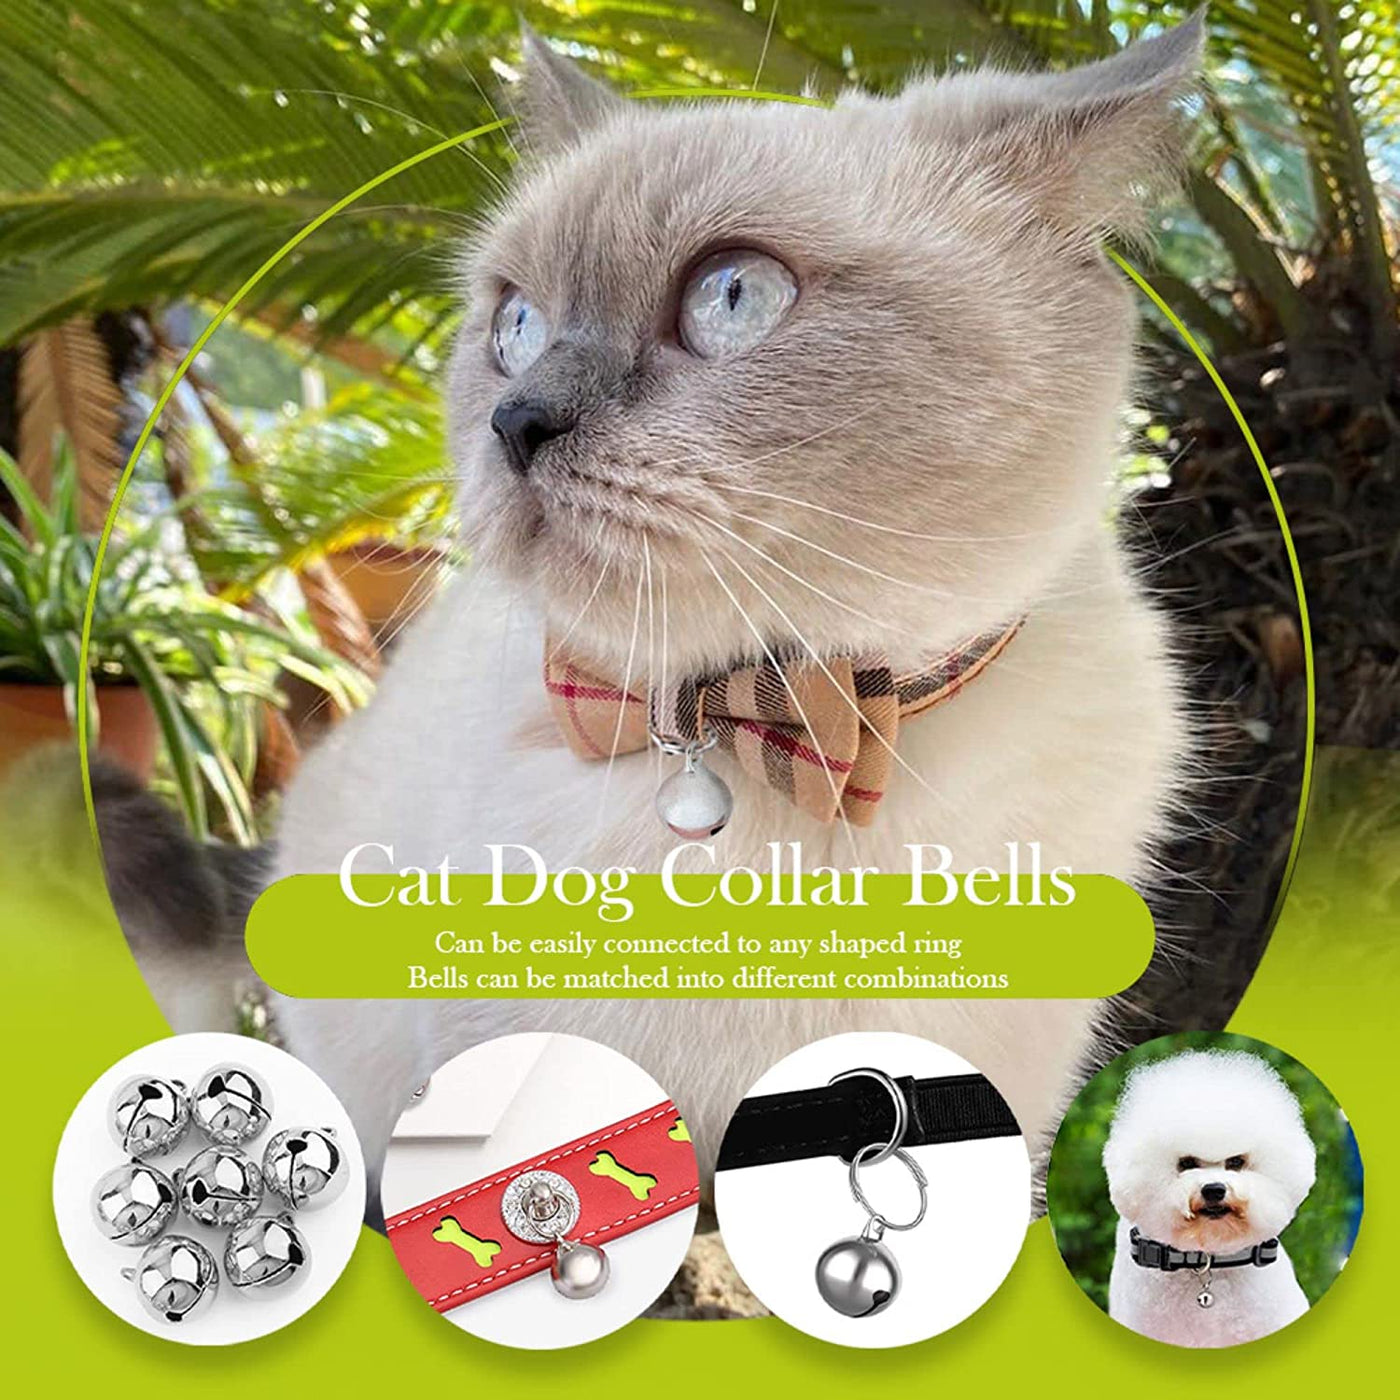 Coastal Pet Pet Bells for Dog Cat Collar Charm Pet Pendant Accessories Stainless Steel, 3 PCS Anti-Lost Training Bells for Collars, Suitable for Pet Pendant Accessories,1/2-Inch, Silver